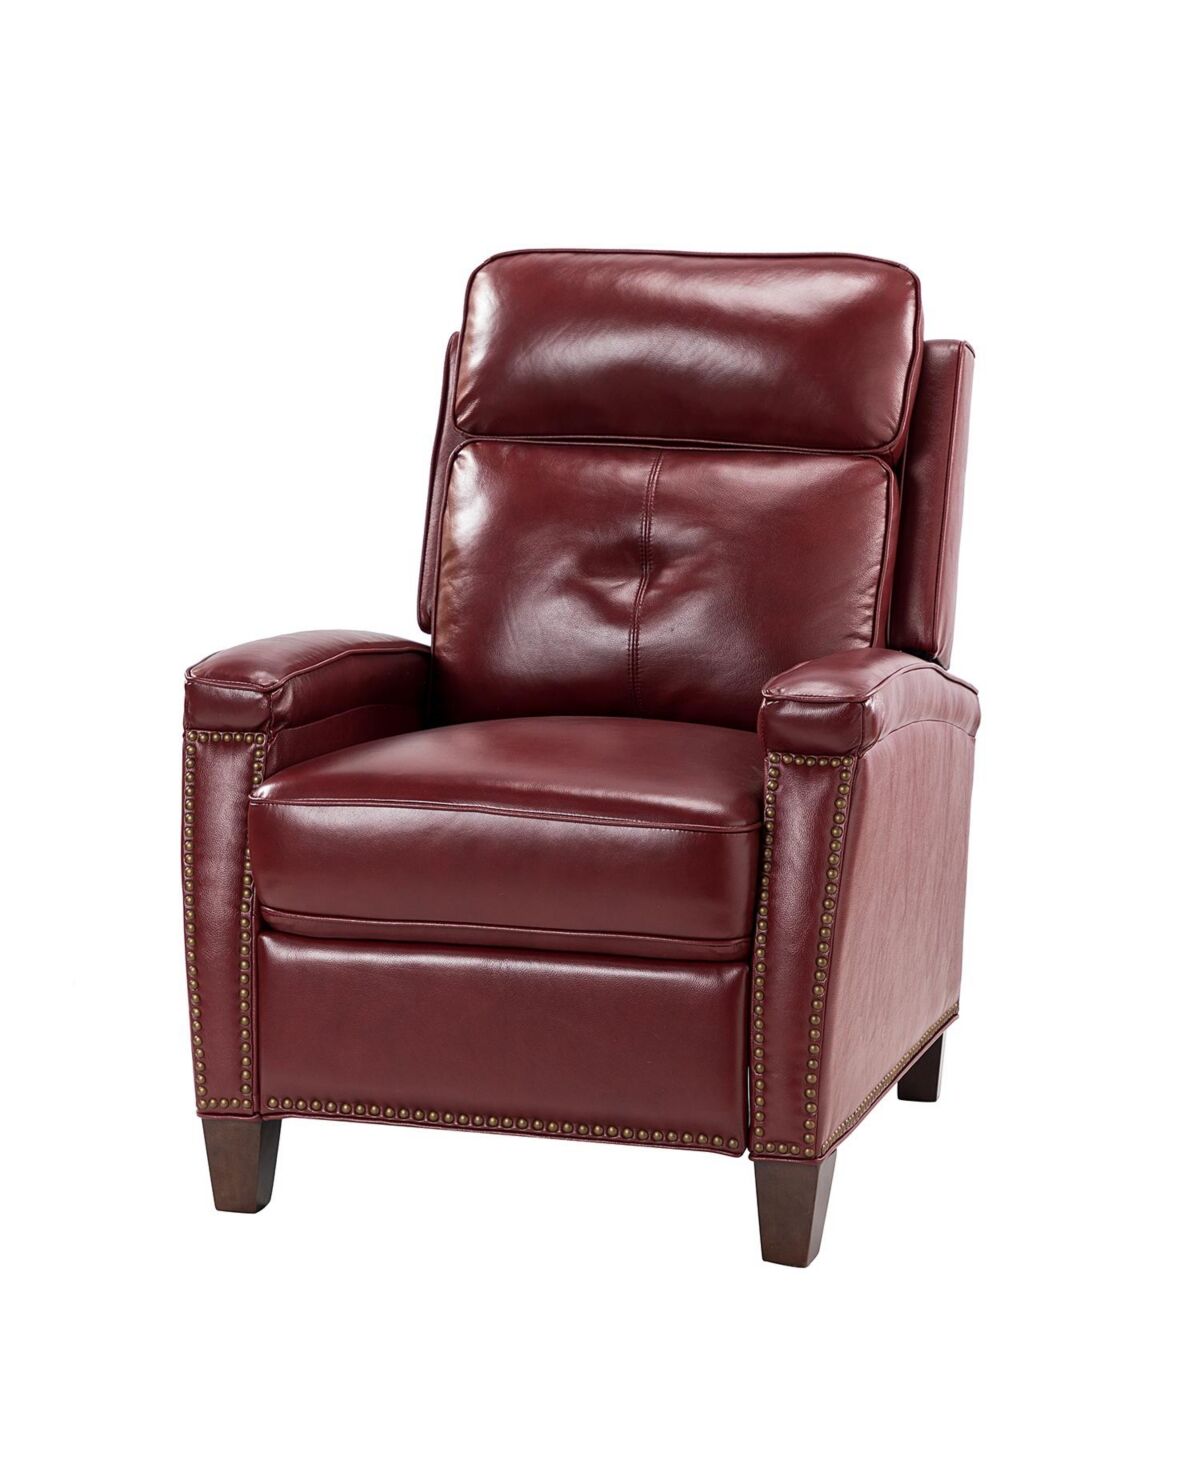 Hulala Home Sickel Genuine Leather Recliner Chair for Bedroom Living Room - Burgundy